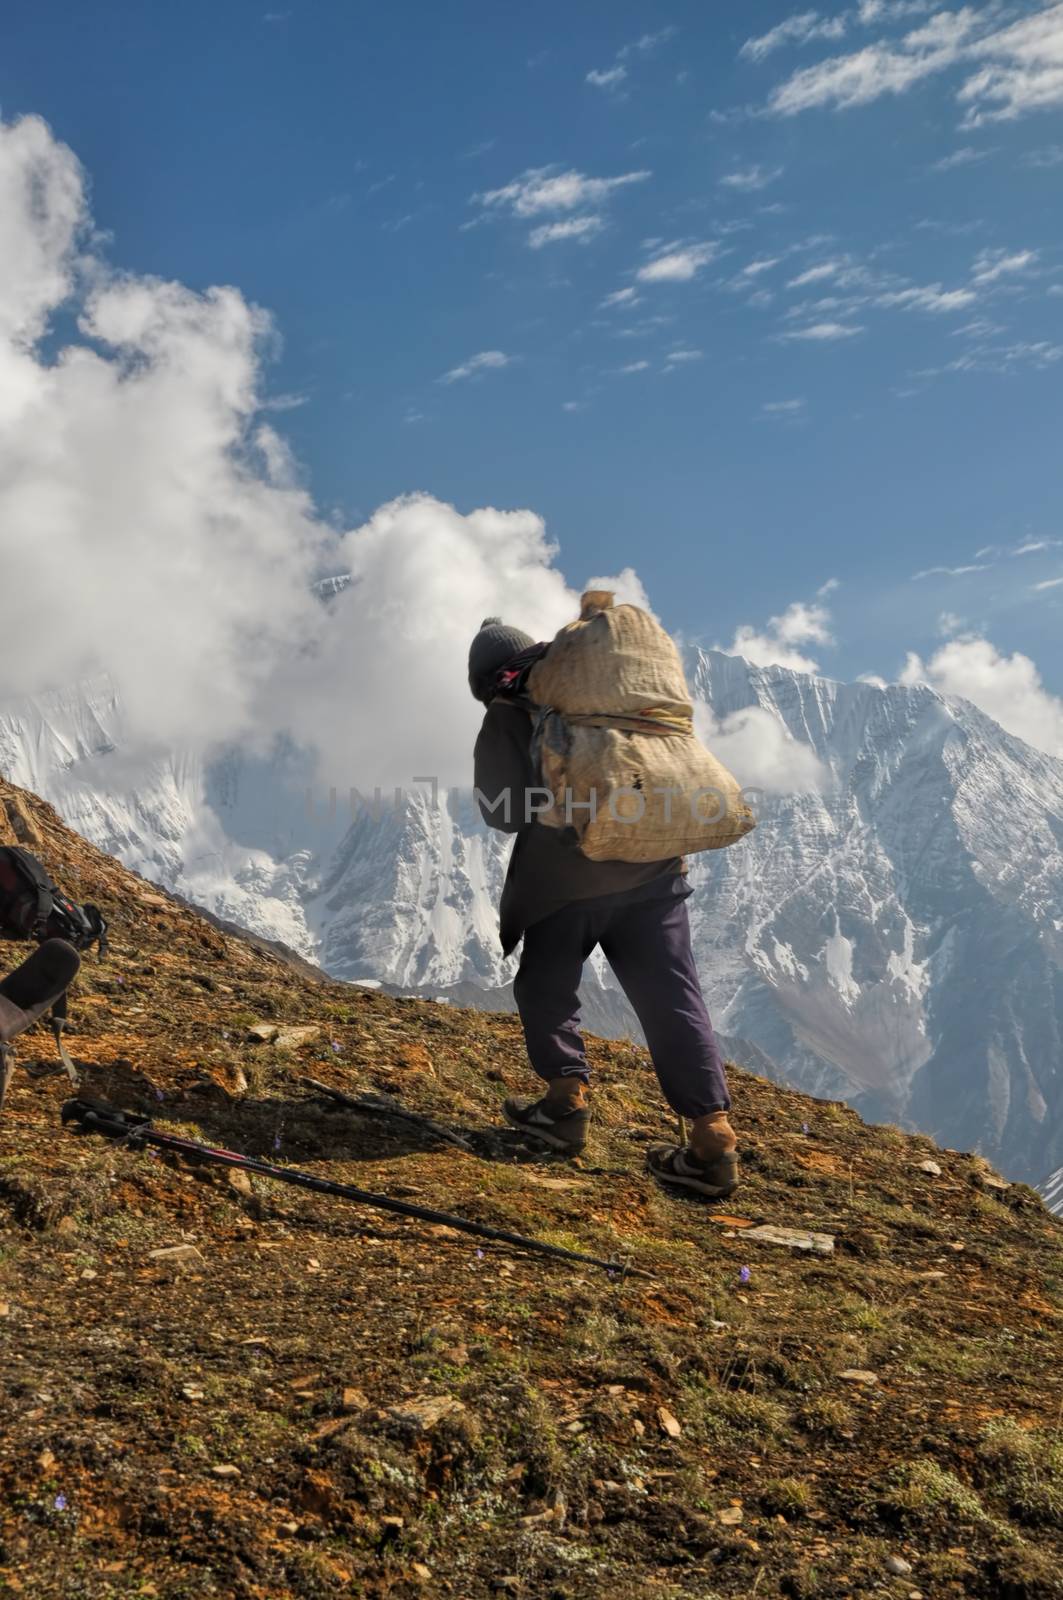 Sherpa in picturesque Himalayas mountains in Nepal